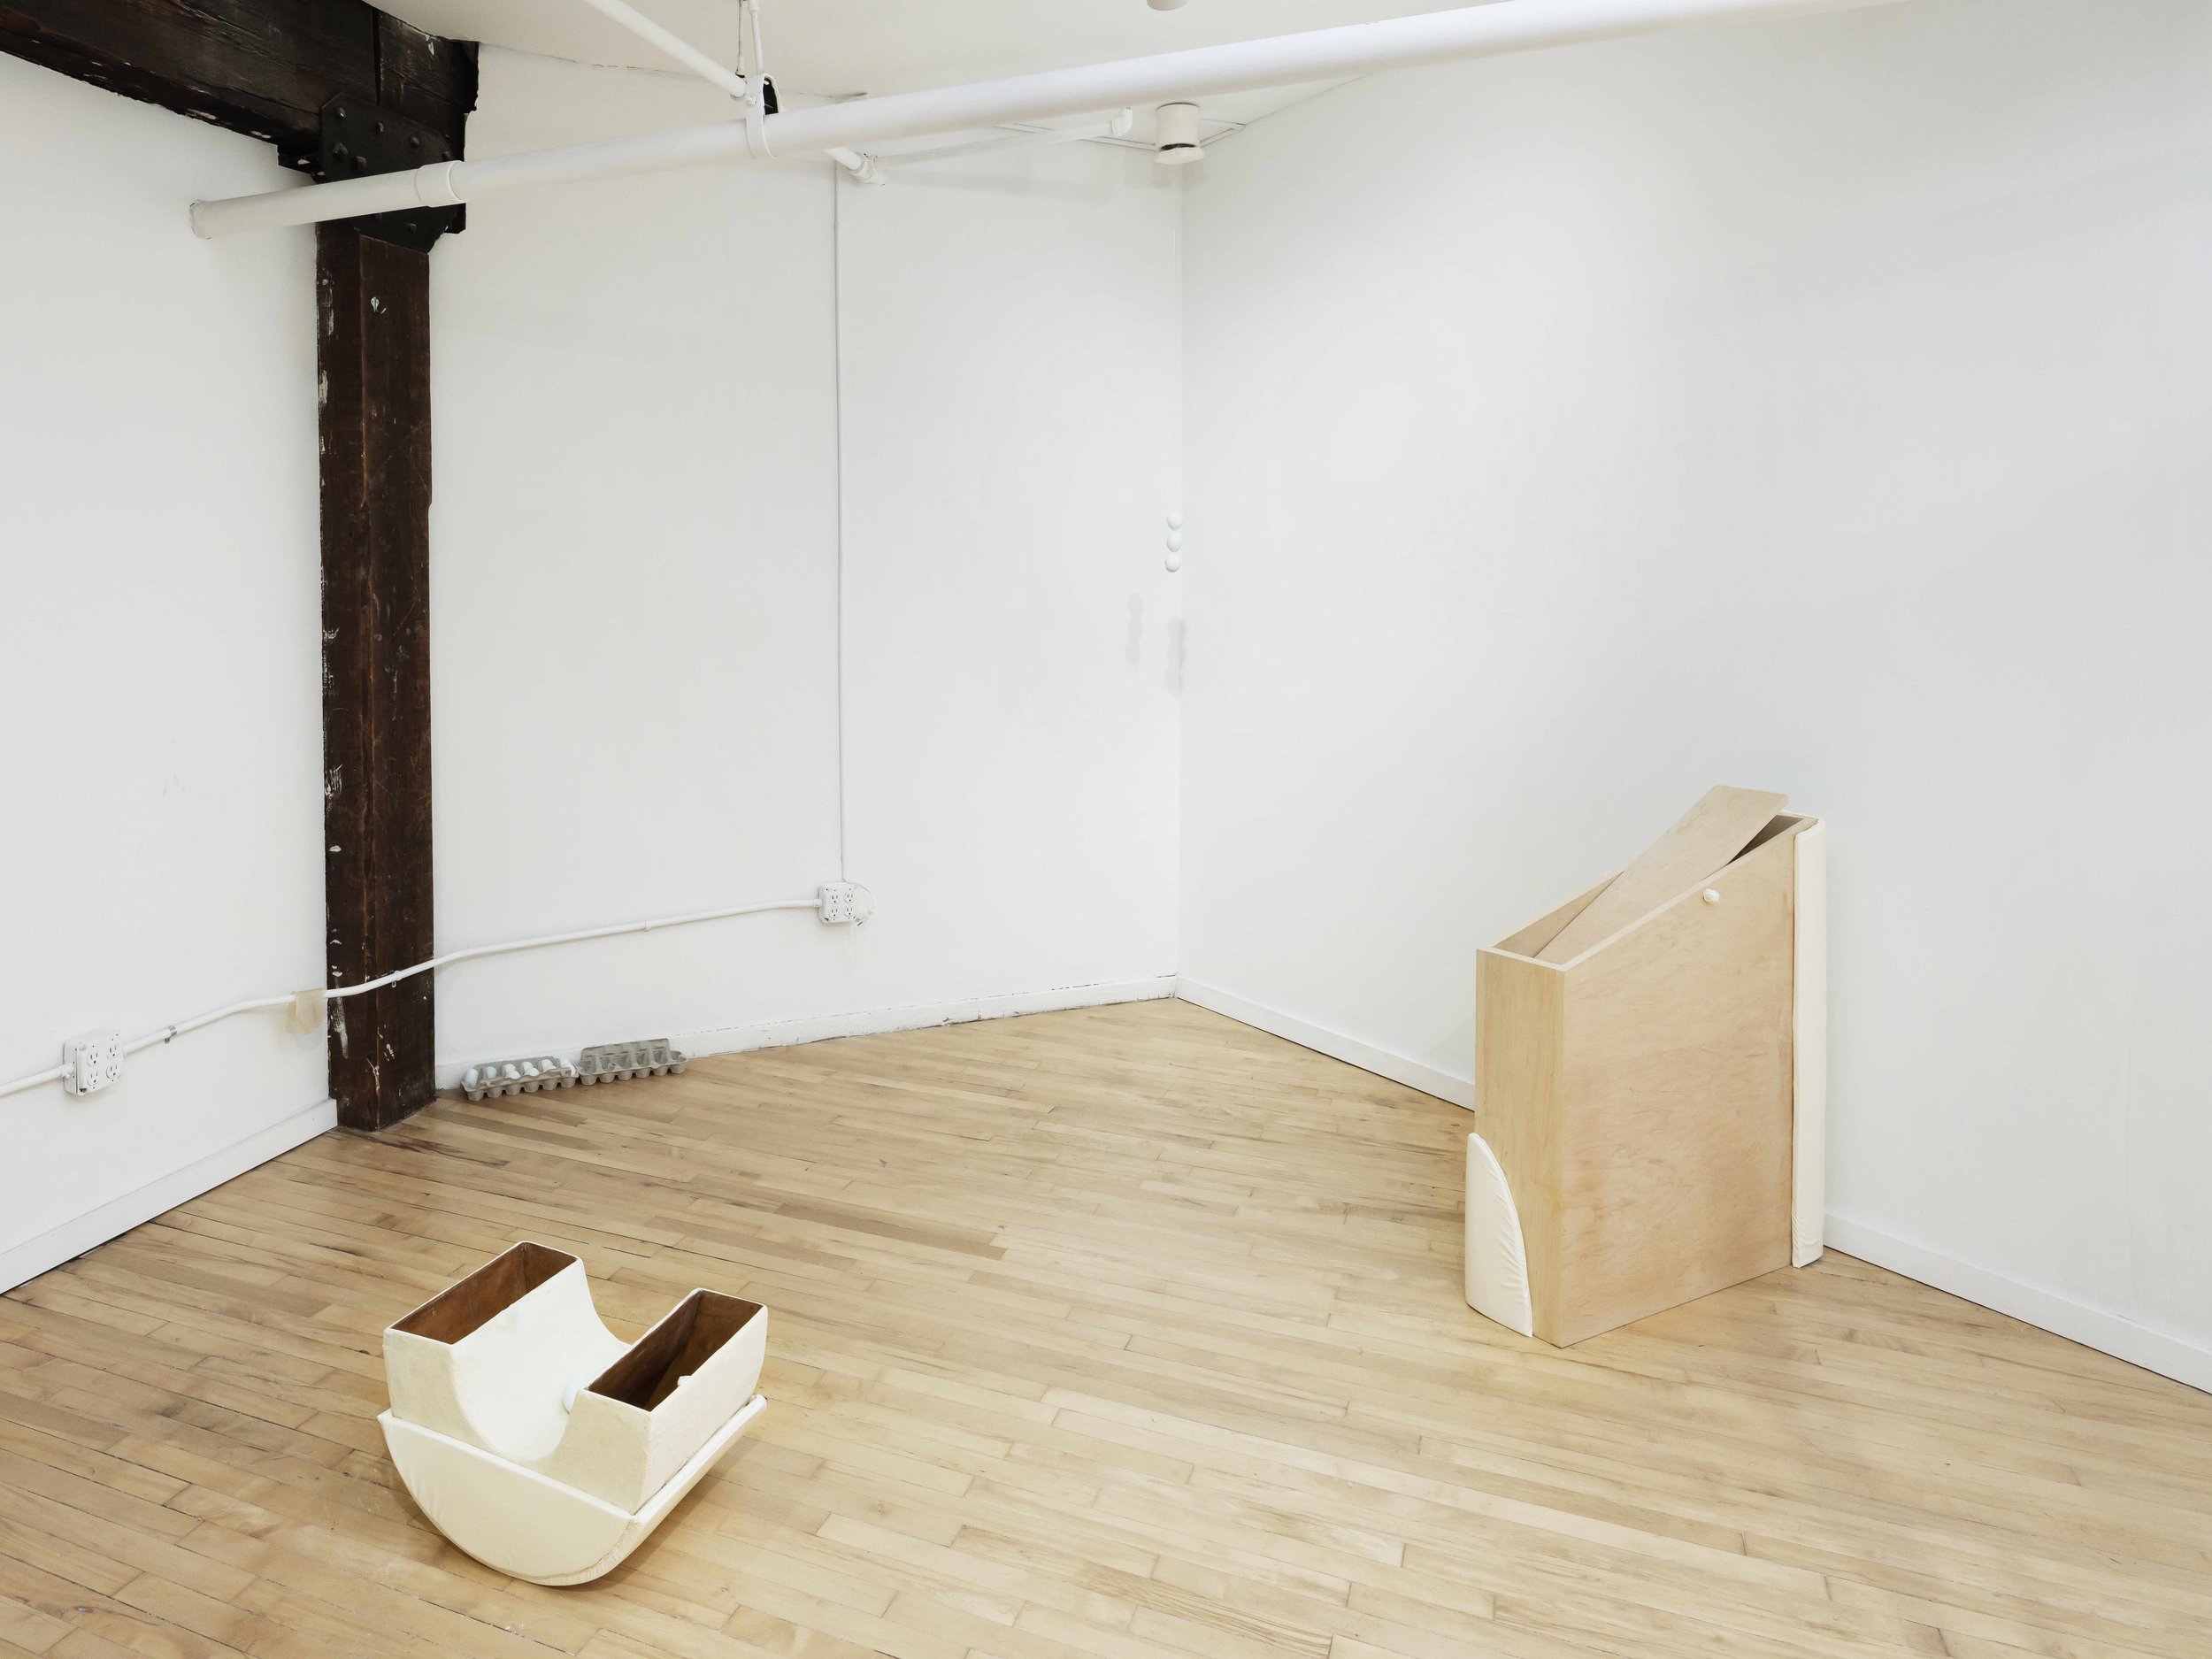 Sliding with things (Installation view)